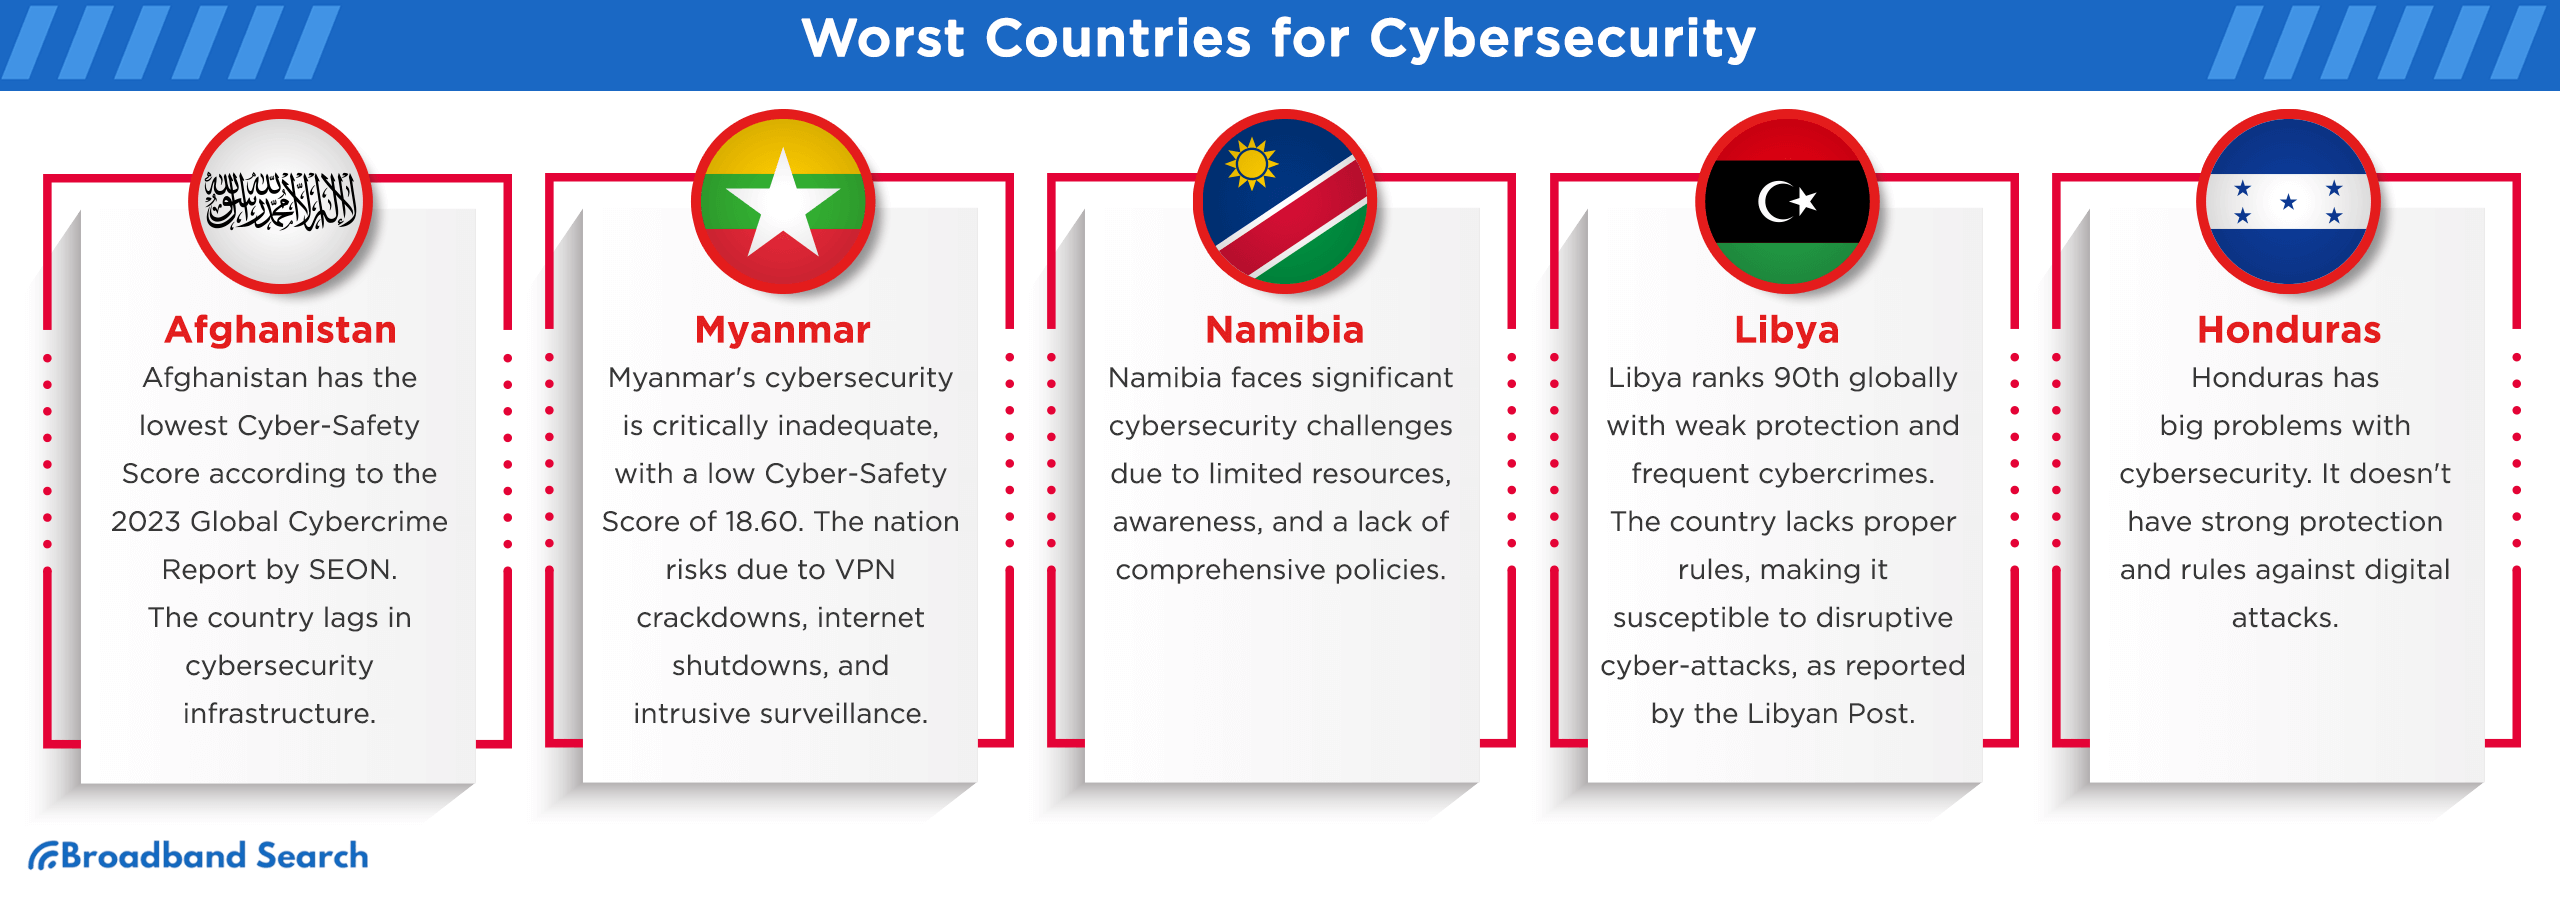 List of worst countries for cybersecurity